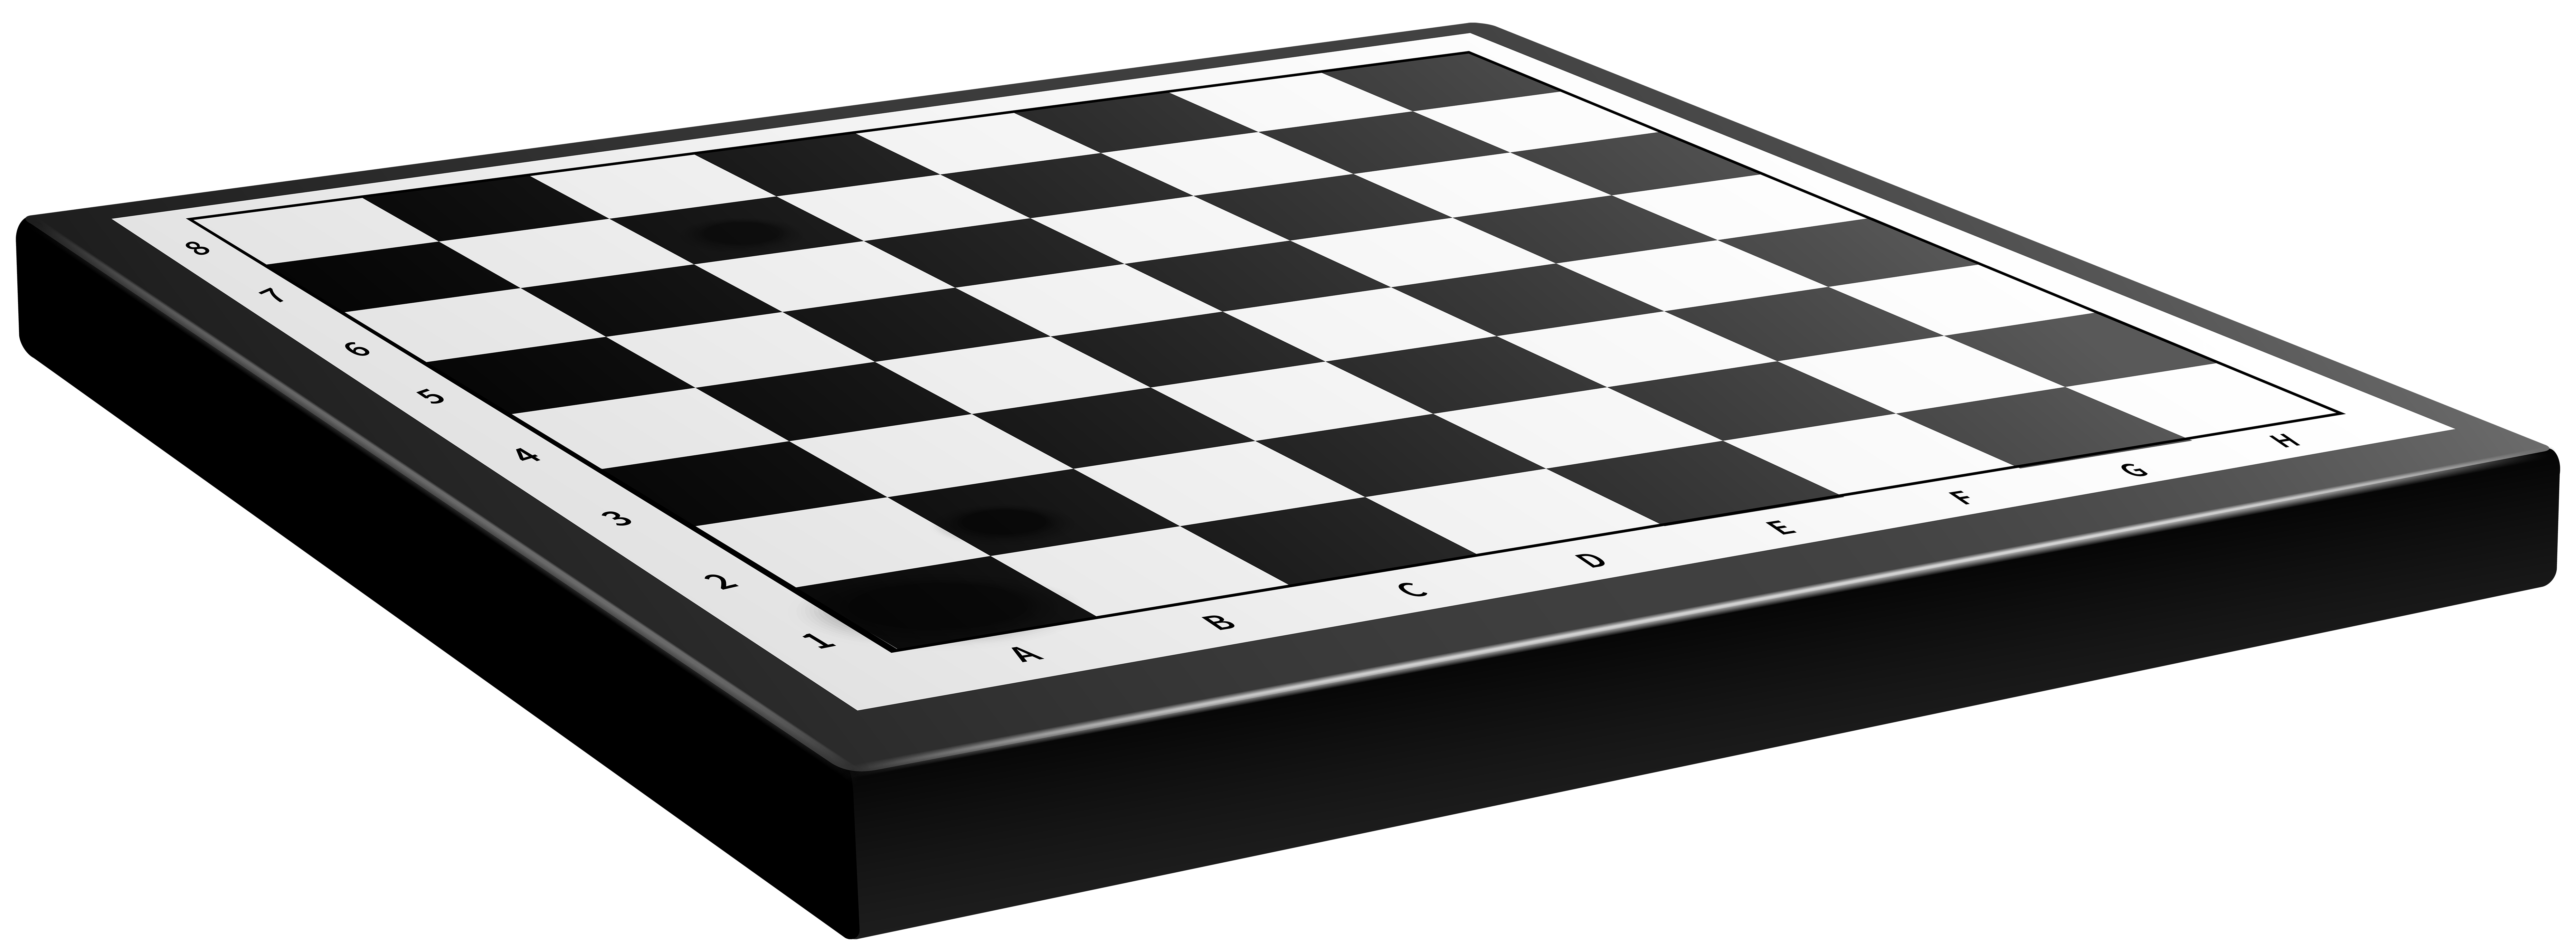 Chess Board Png